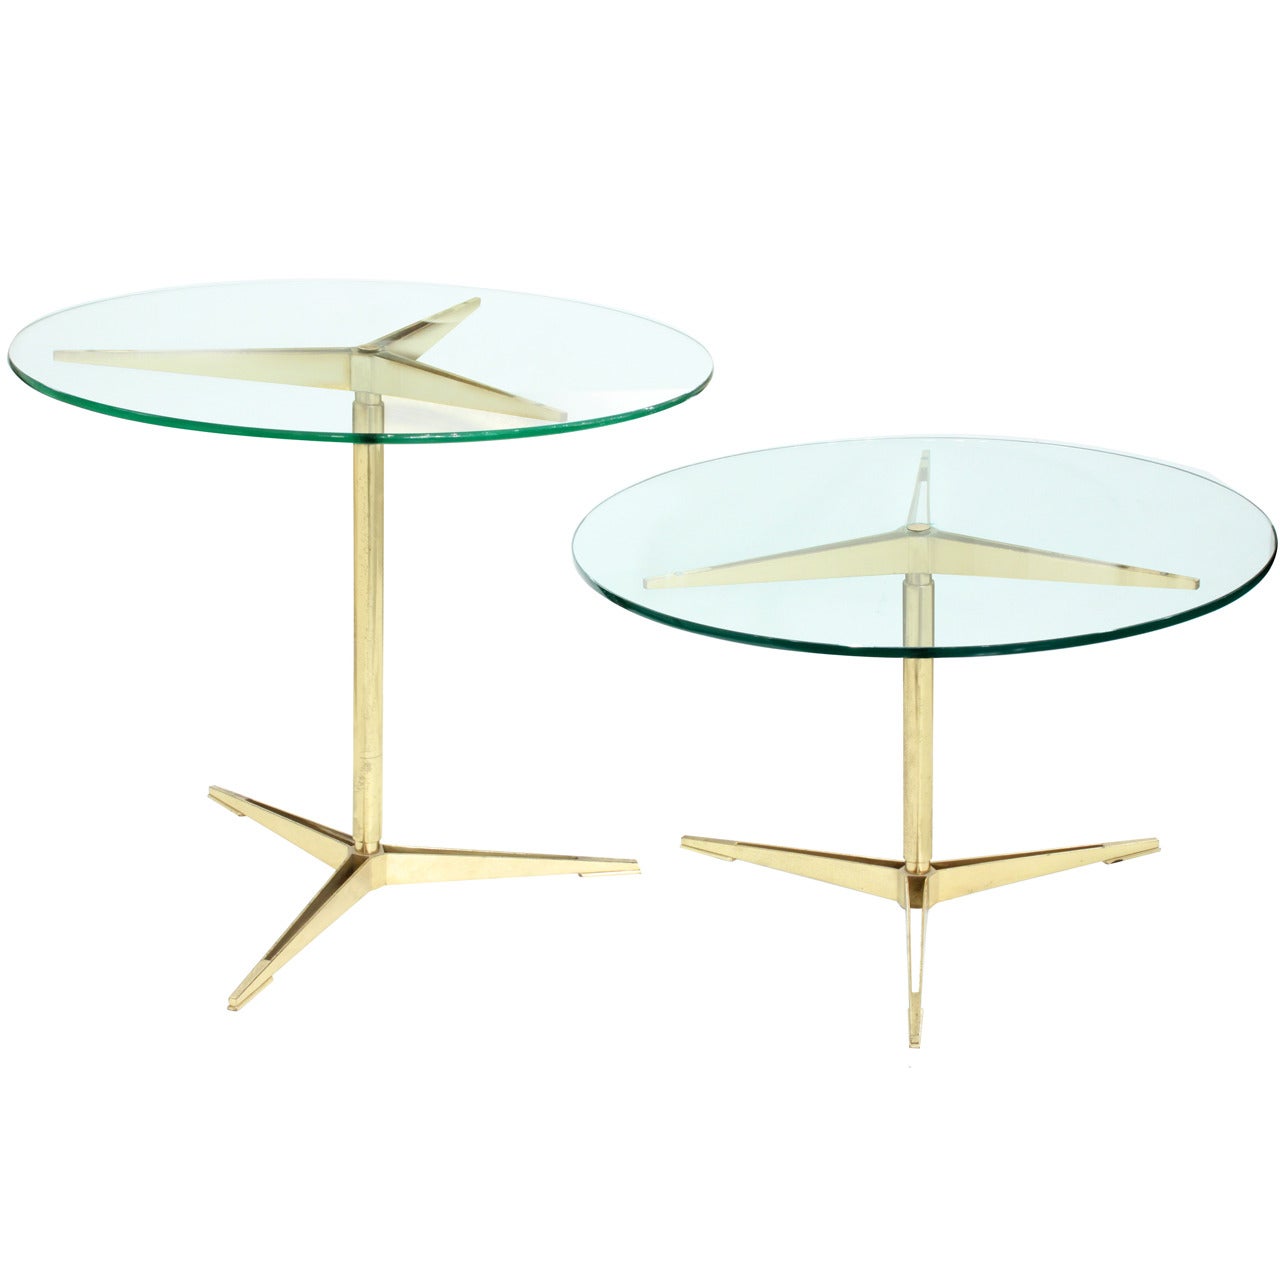 Pair of Rare Staggered Height Coffee Tables by Ico and Luisa Parisi